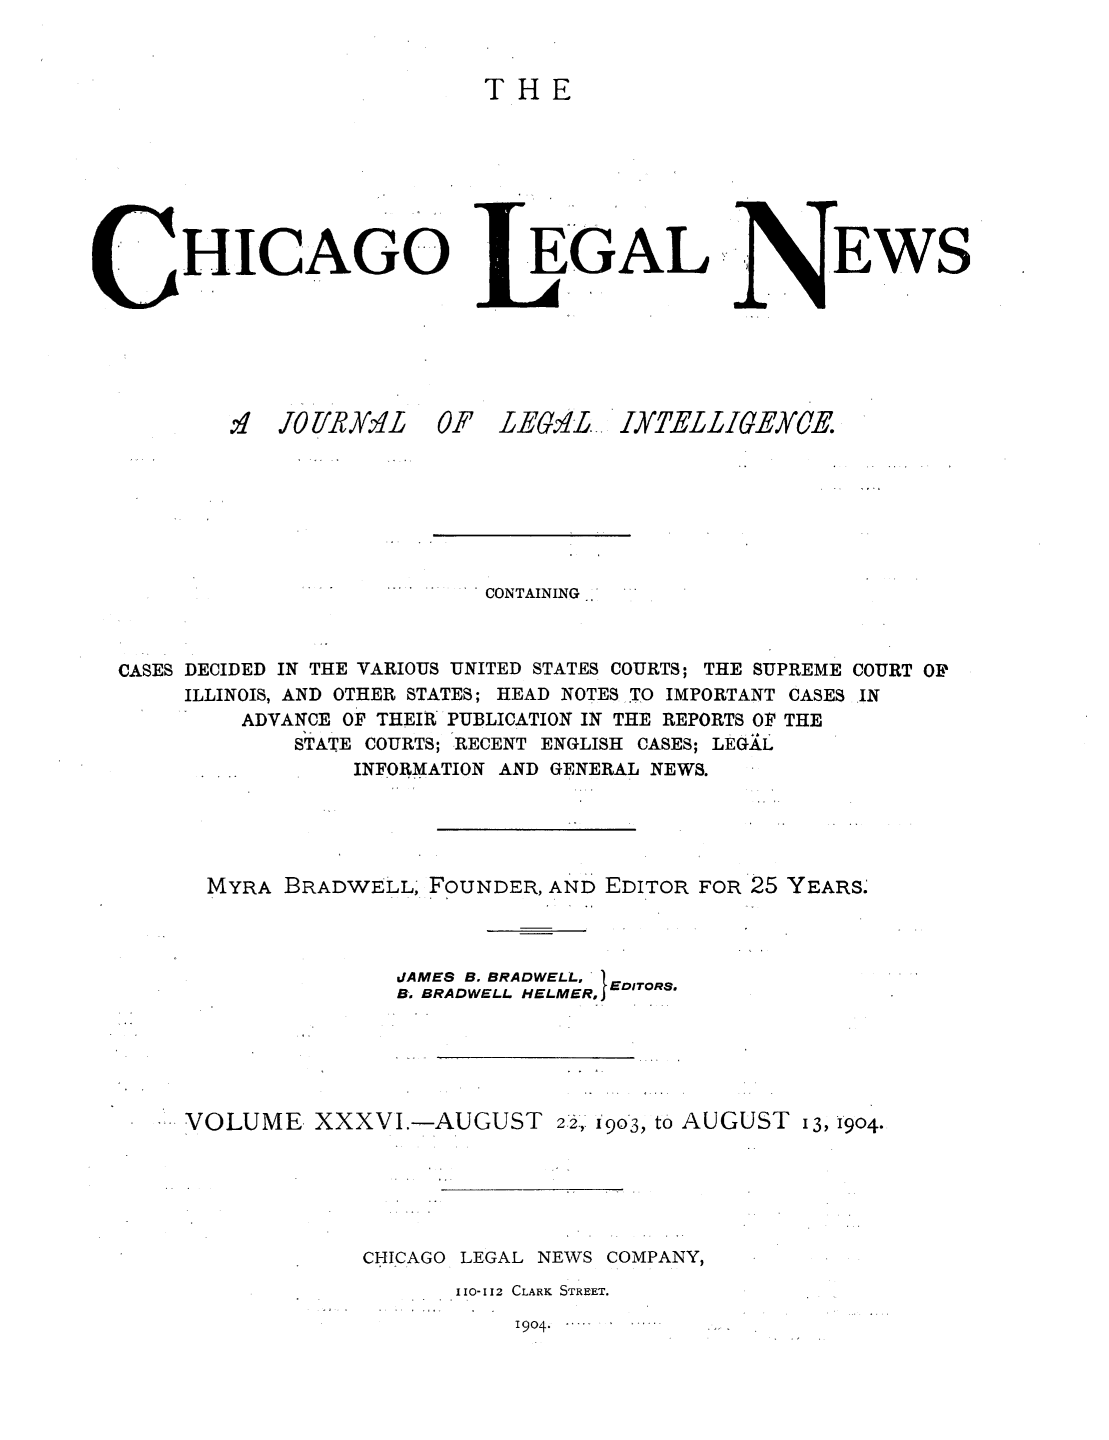 handle is hein.journals/chiclene36 and id is 1 raw text is: THEHICAGOEGALEWSSJTO UR YALOF LEG'Lo IXTELLIGEYCE.CONTAINING-'CASES DECIDED IN THE VARIOUS UNITED STATES COURTS; THE SUPREME COURT OPILLINOIS, AND OTHER STATES; HEAD NOTES TO IMPORTANT CASES INADVANCE OF THEIR PUBLICATION IN THE REPORTS OF THESTATE COURTS; RECENT ENGLISH CASES; LEGALINFORMATION AND GENERAL NEWS.MYRA BRADWELL, FOUNDER, AND EDITOR FOR 25 YEARS.dAMES B. BRADWELL,   RB. BRADWELL. HELMERo EDIT°RSVOLUME XXXVI.-AUGUST 22, 1903, to AUGUST 13, 1904.CHICAGO LEGAL NEWS COMPANY,110-112 CLARK STREET.1904. ....